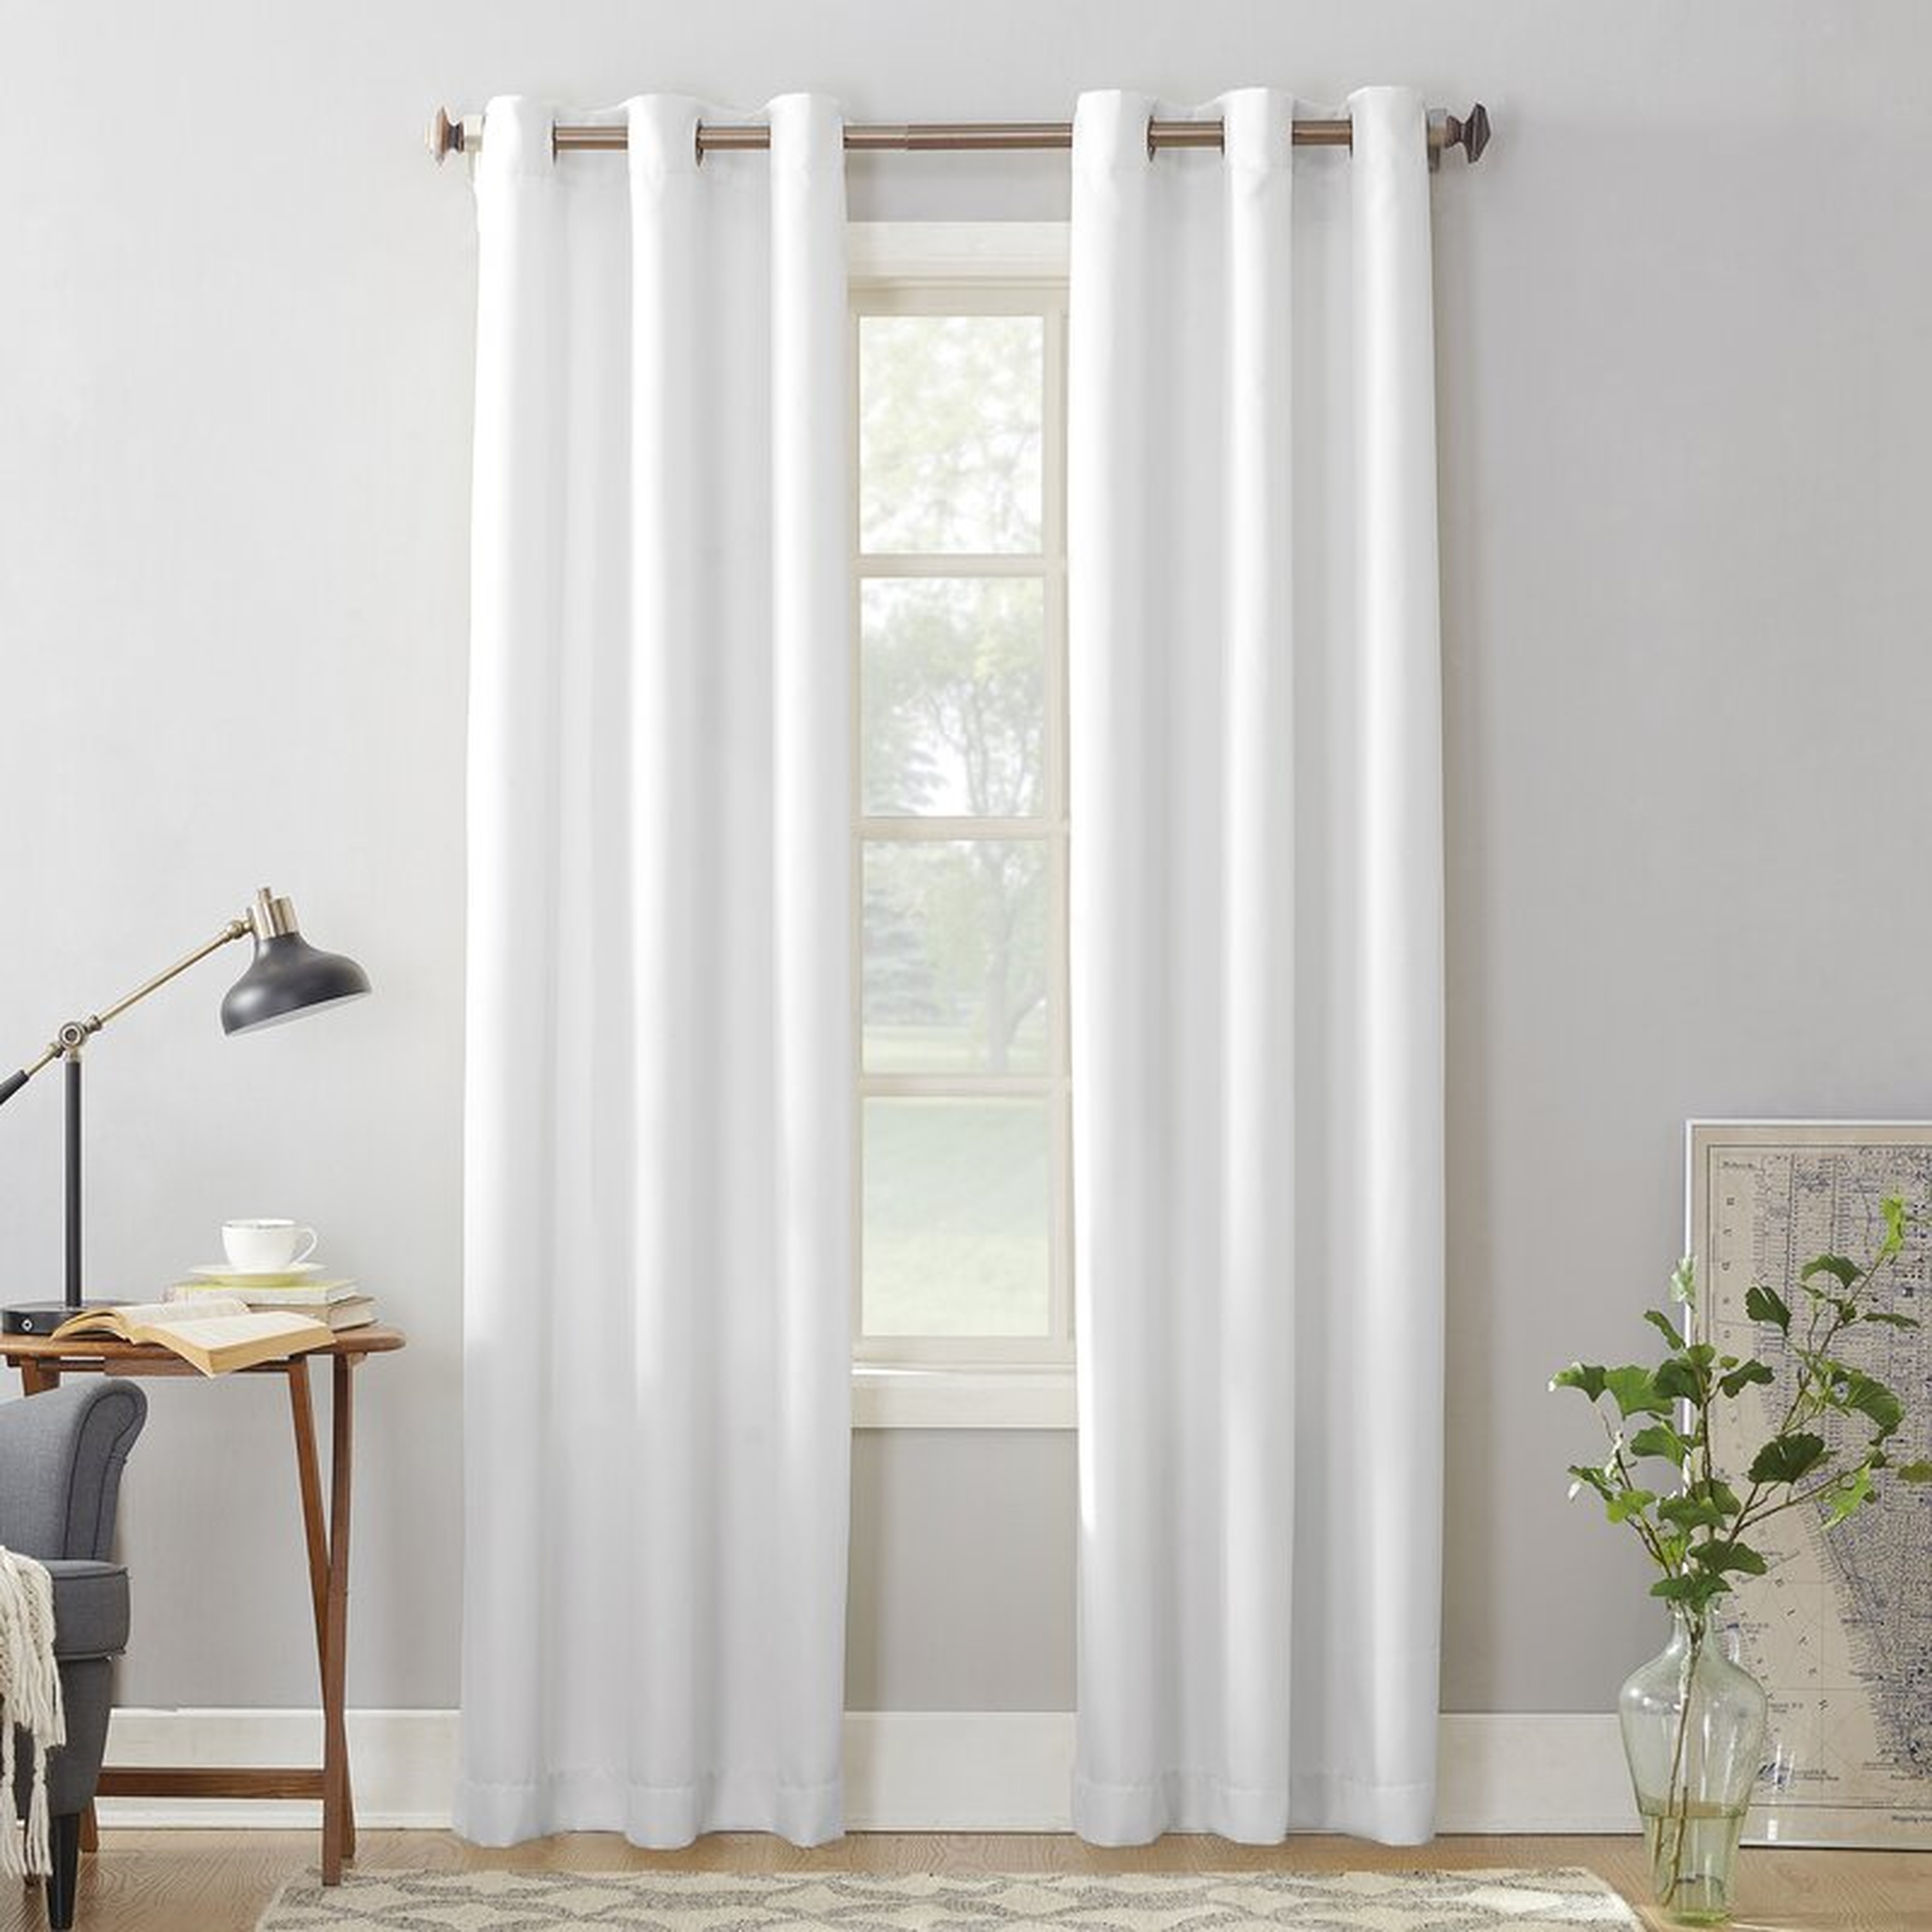 Traditional Bedroom Design Shop the Look by Alcott Hill in Alcott Hill Beulah Solid Semi-Sheer Grommet Single Curtain Panel - Wayfair